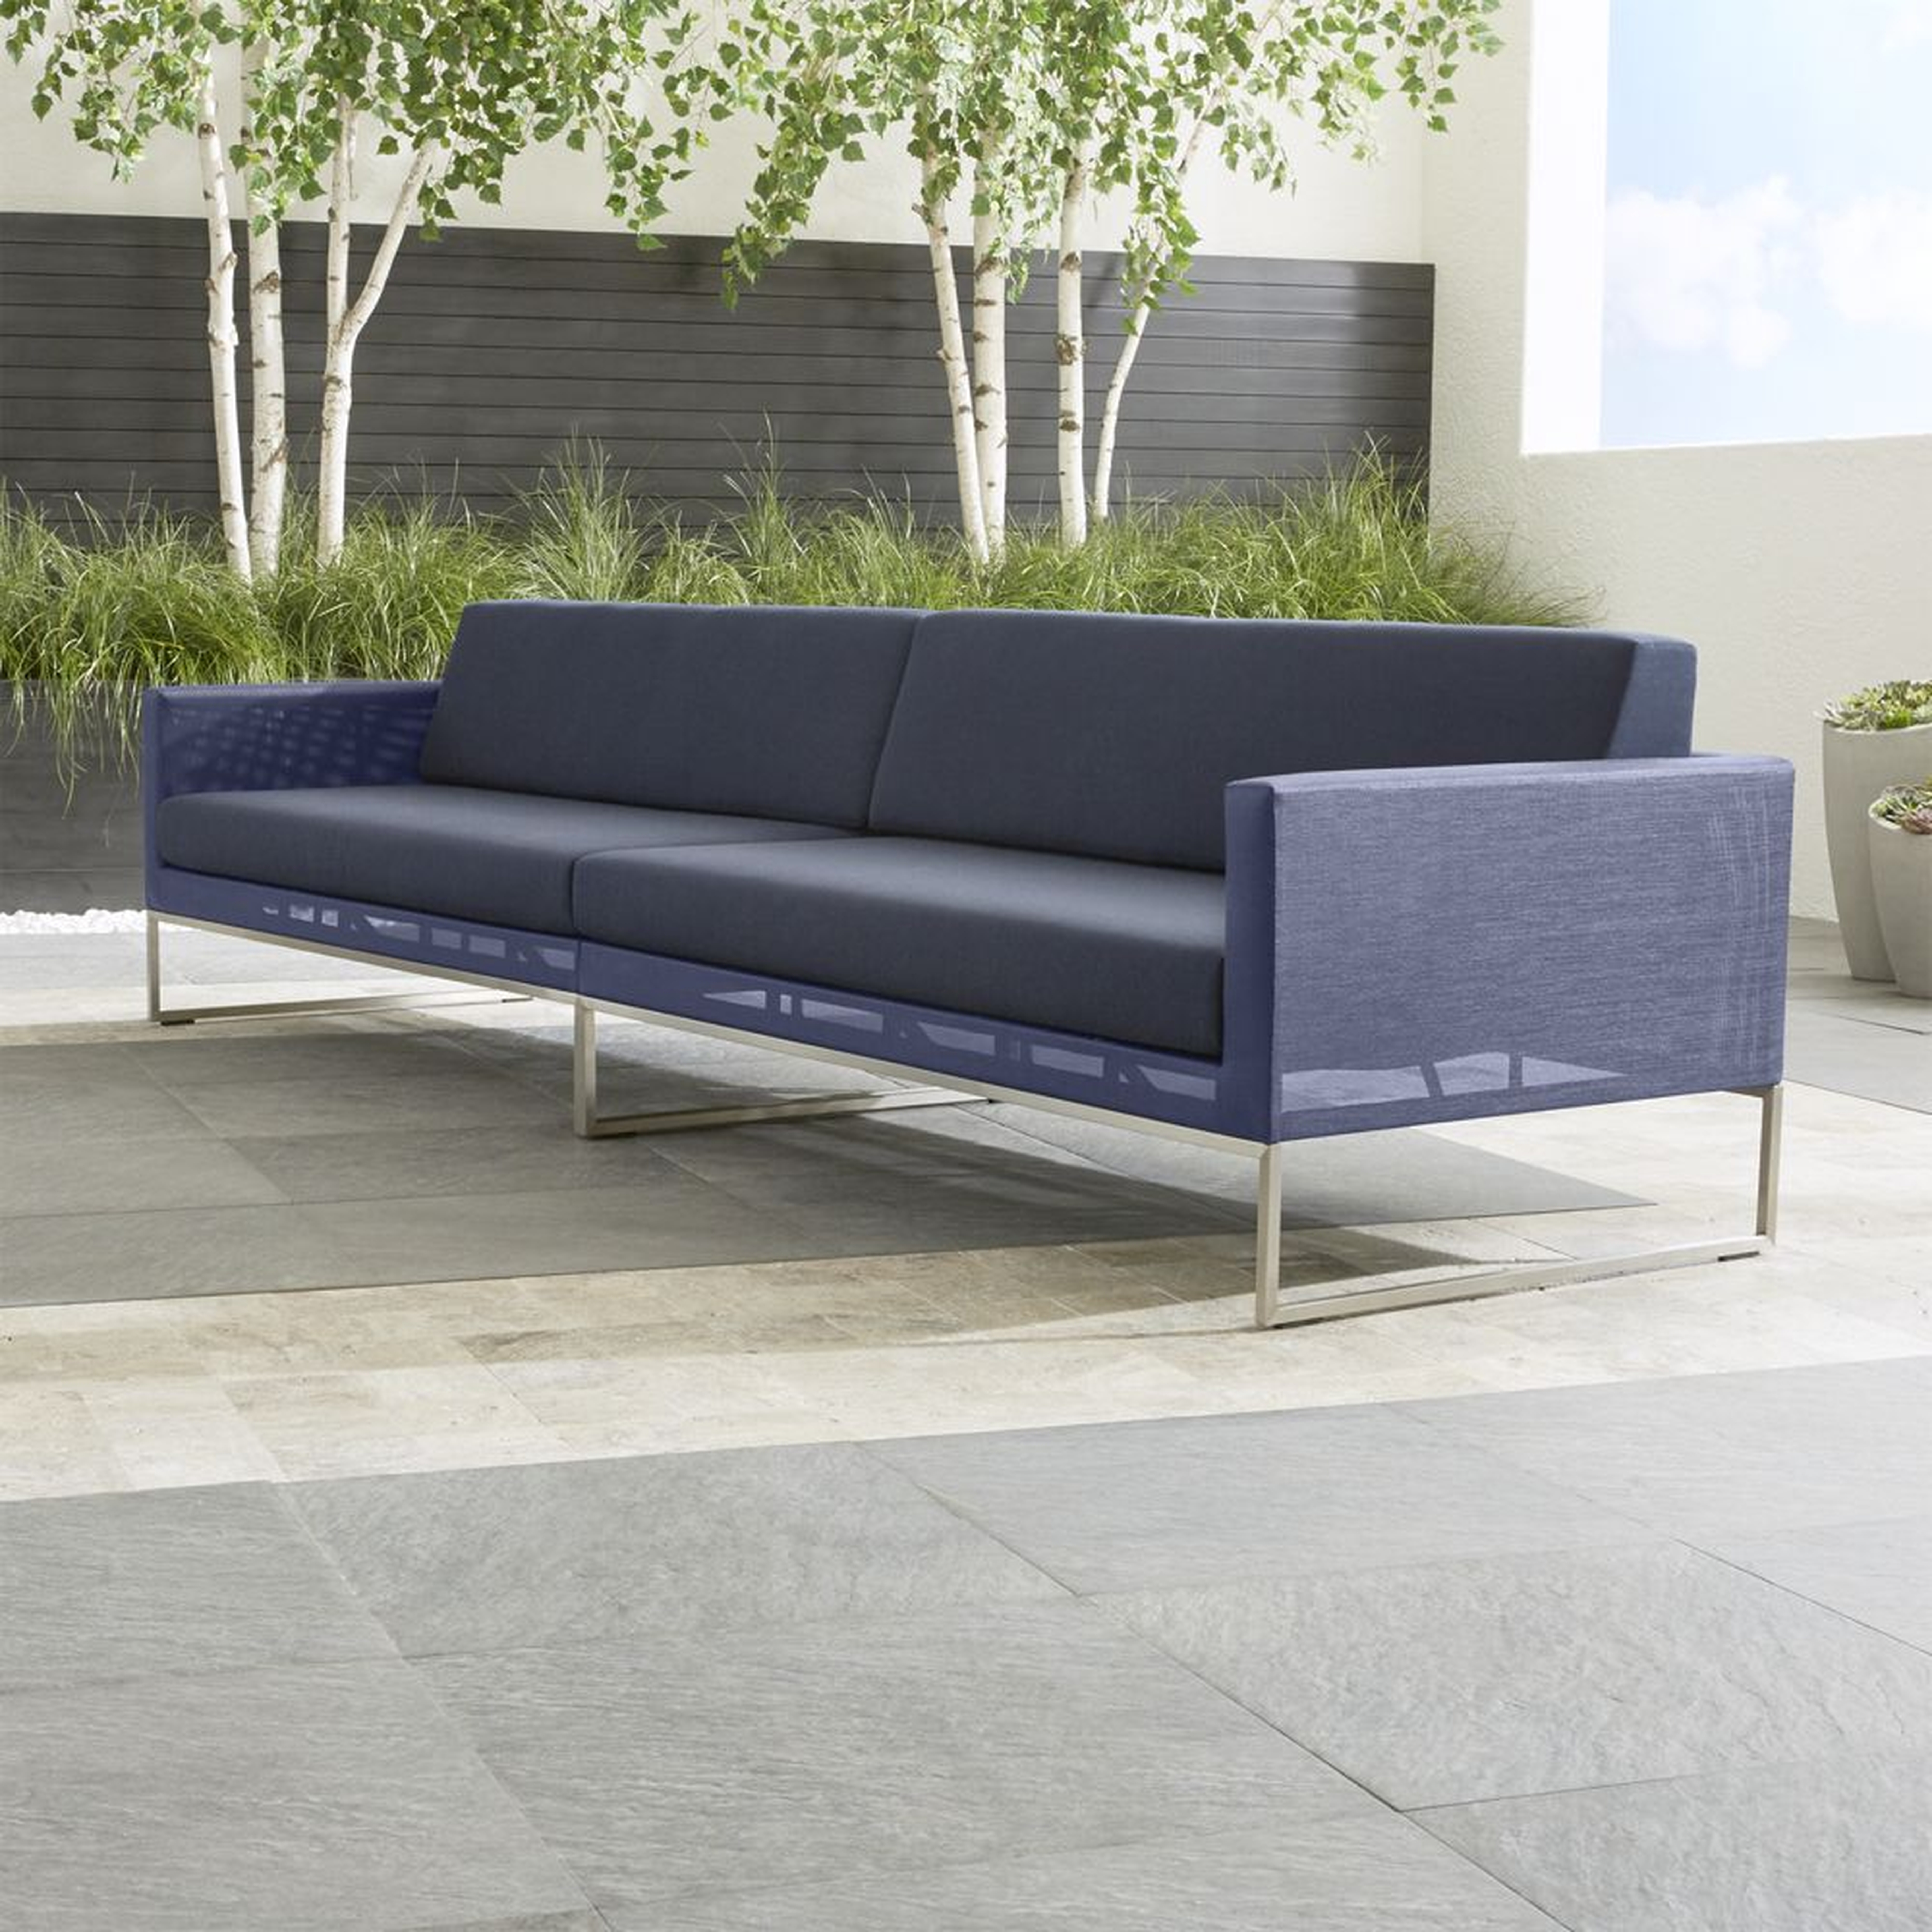 Dune Navy 2-Piece Outdoor Sectional Sofa with Sunbrella ® Cushions - Crate and Barrel